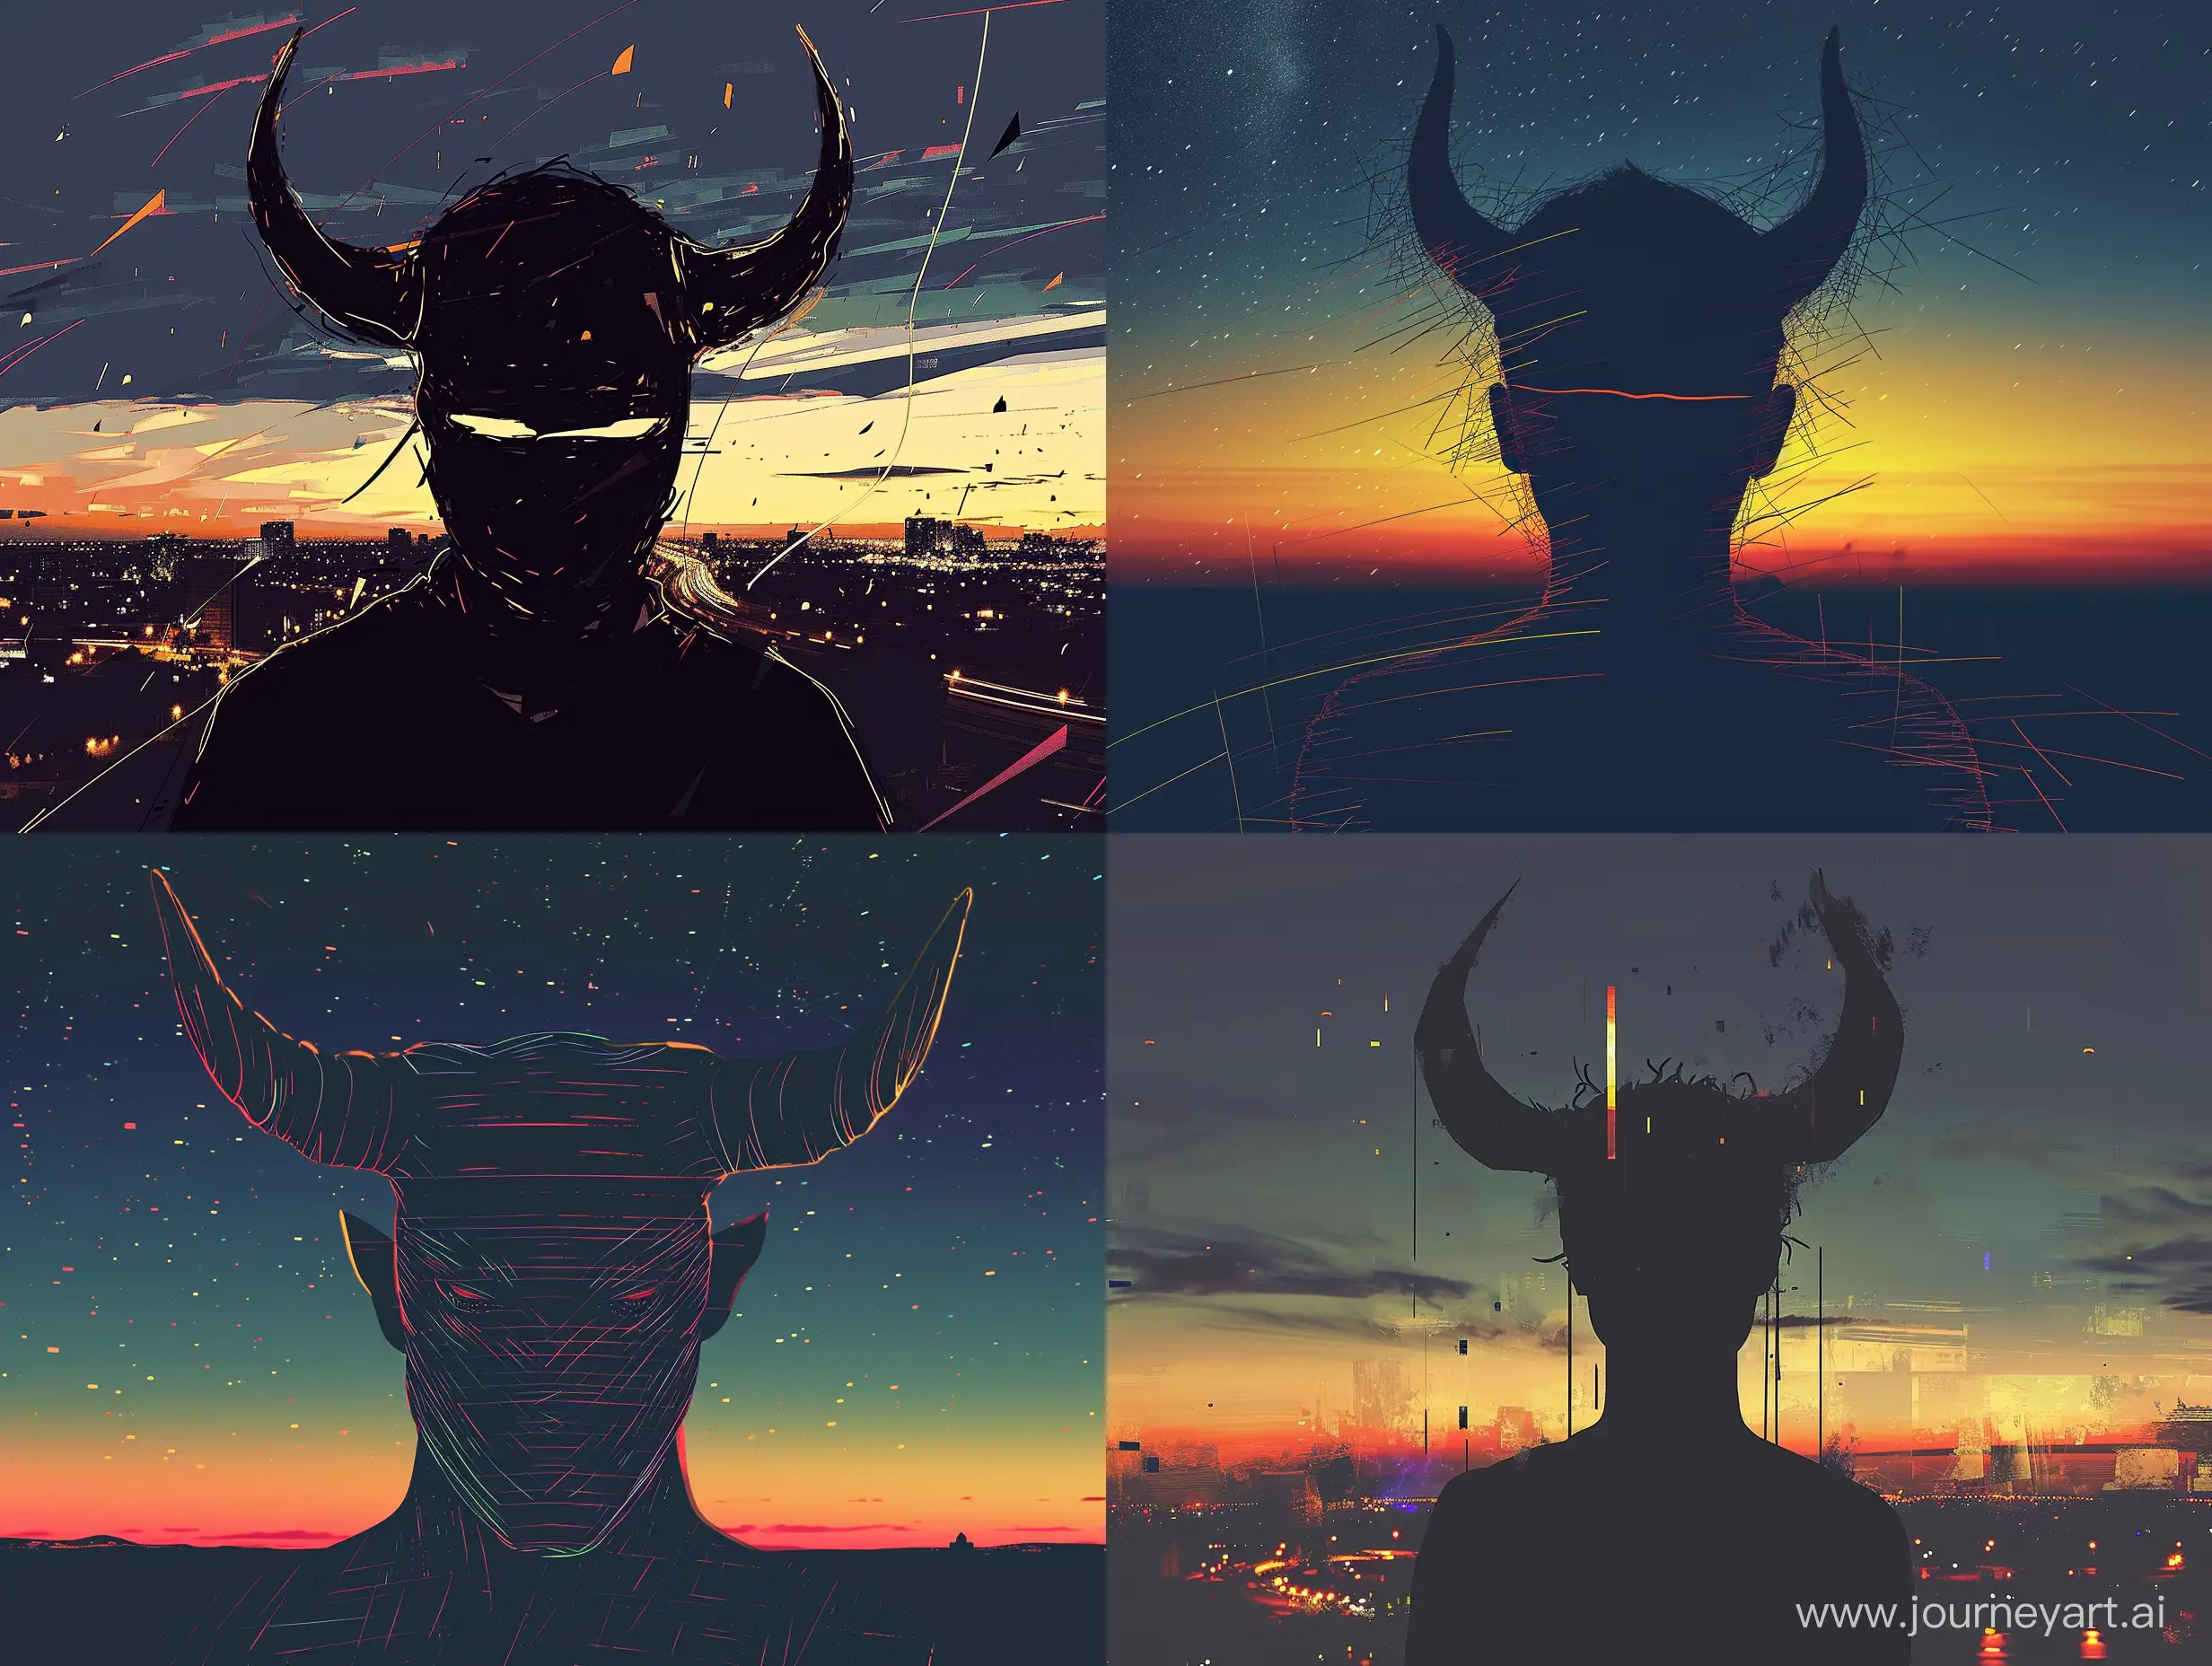 horned silhouette with a contour and a simple face as if drawn, against a realistic night background, abstract and geometric strokes like alberto mielgo art style, super realistic lighting with rich realistic colors --v 6